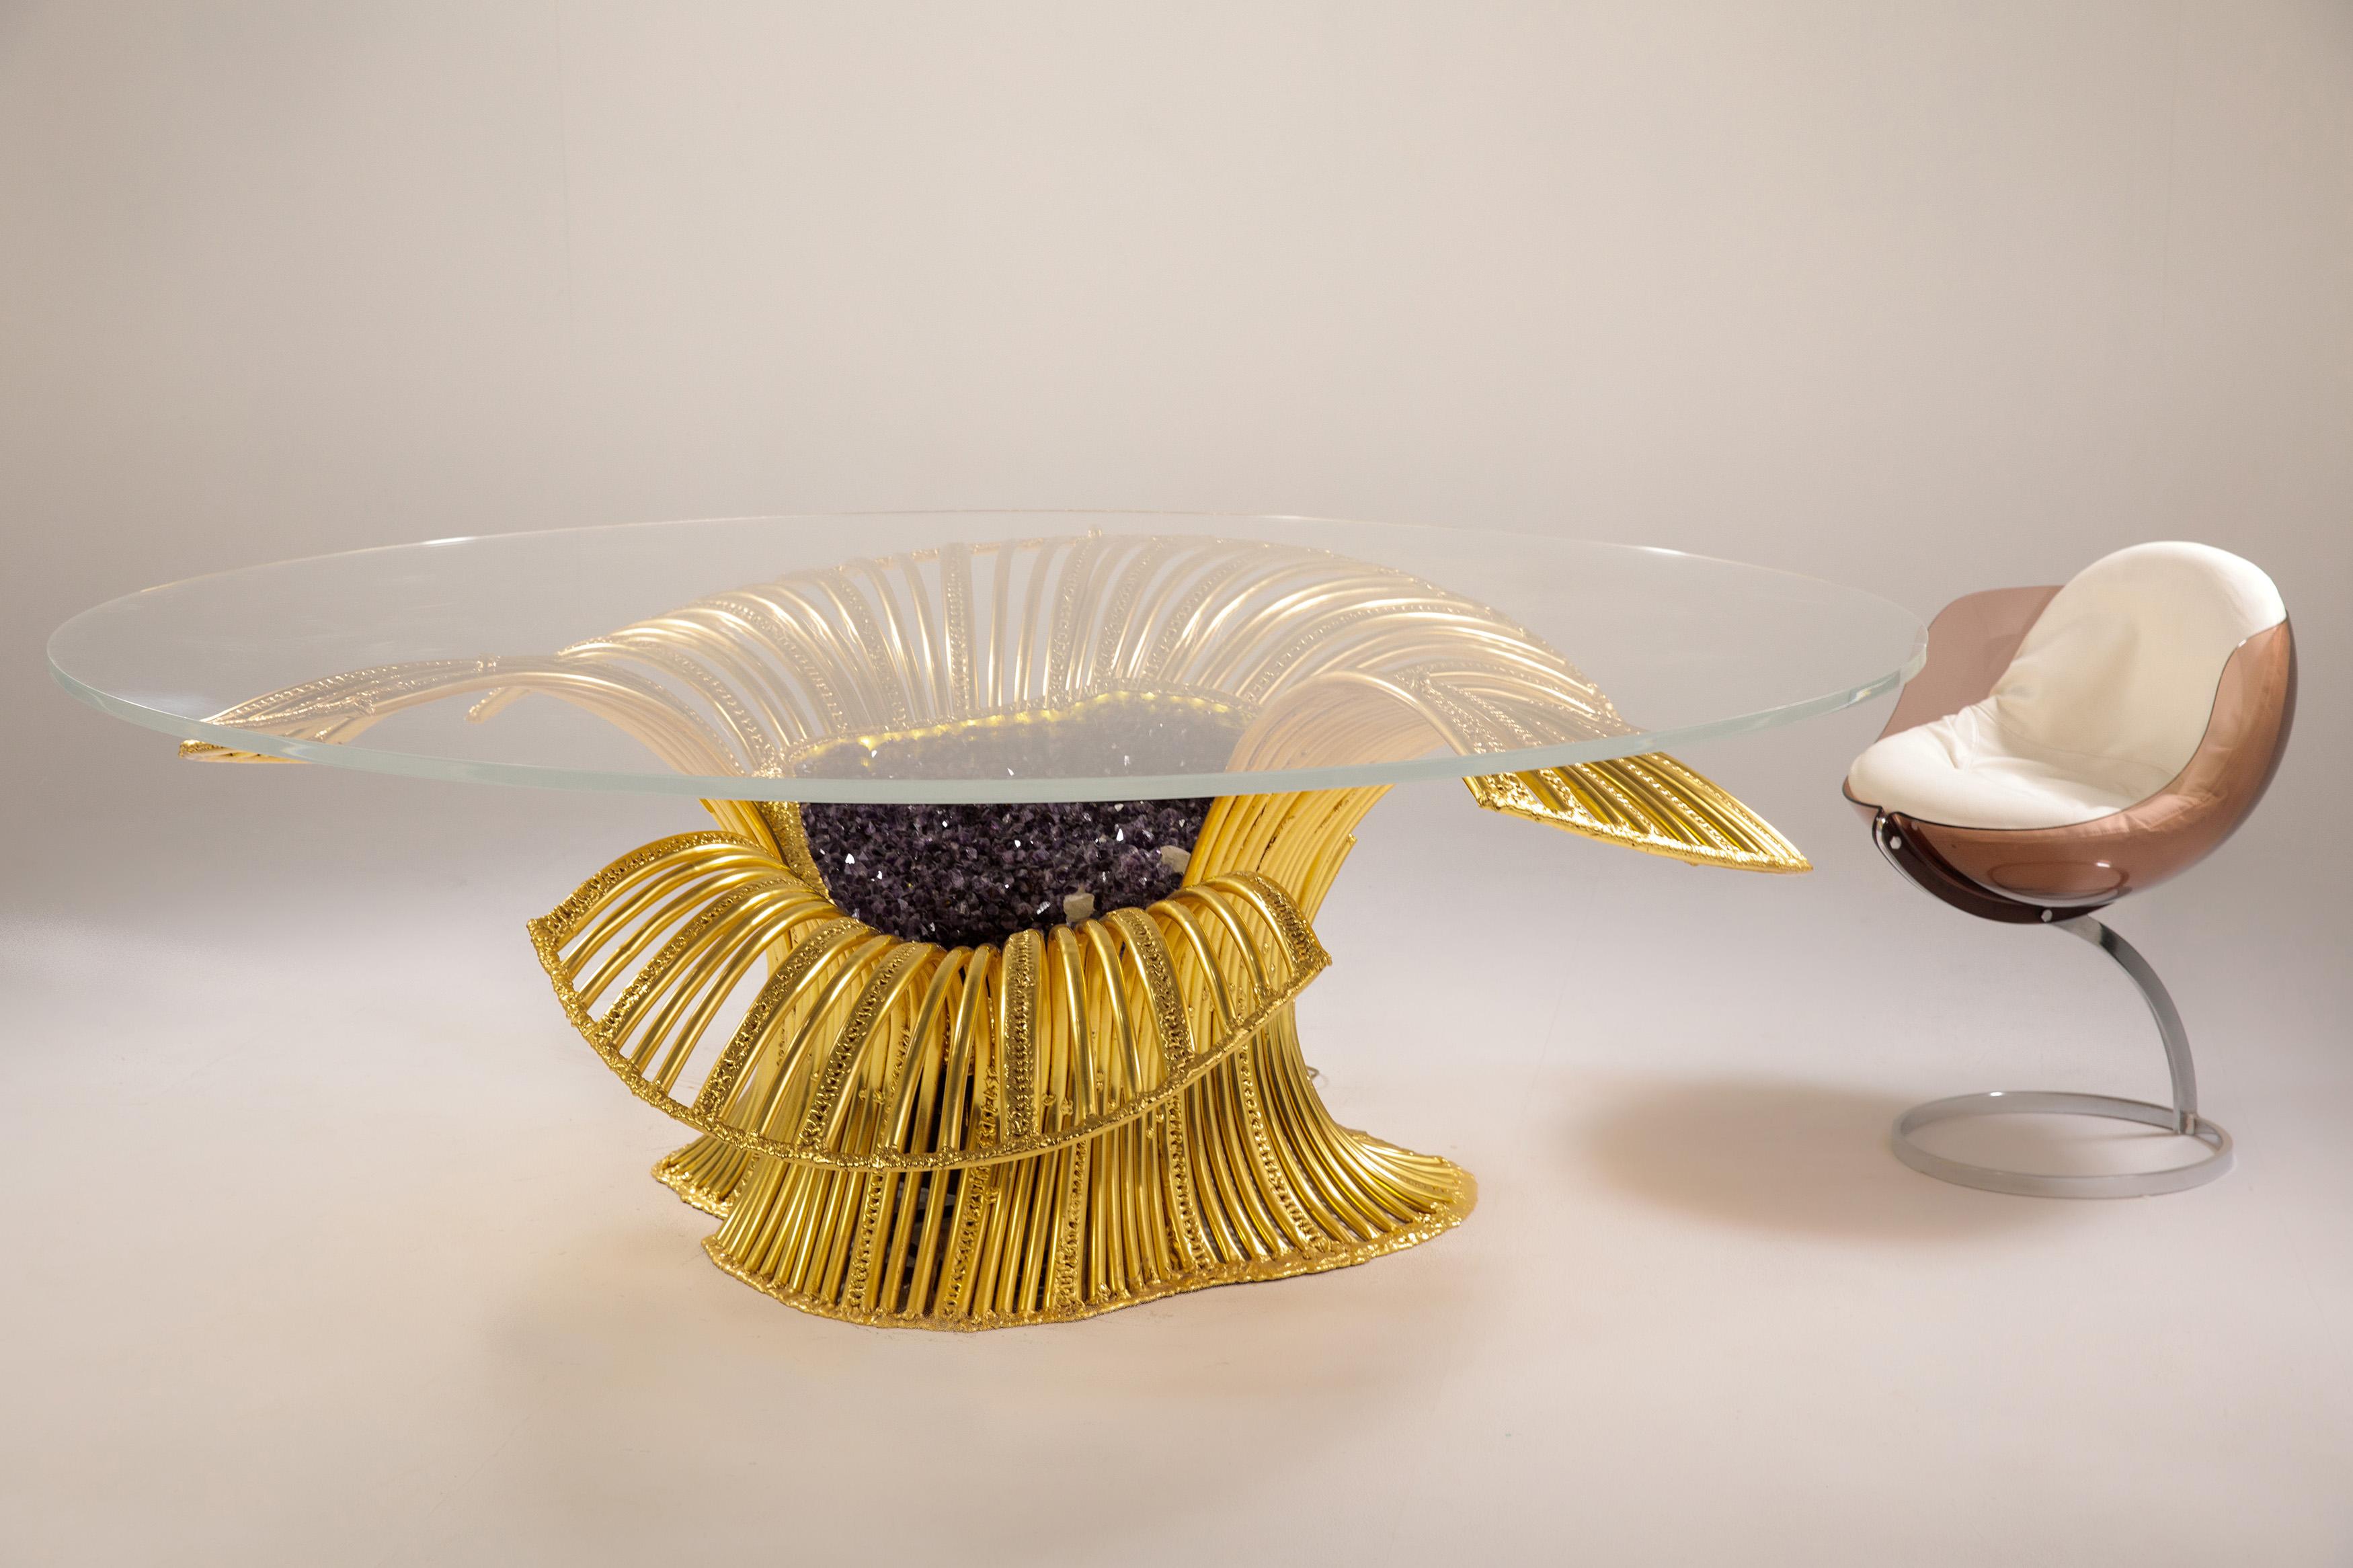 Late 20th Century Sea Anemone, Sculpture-Table by Richard Faure